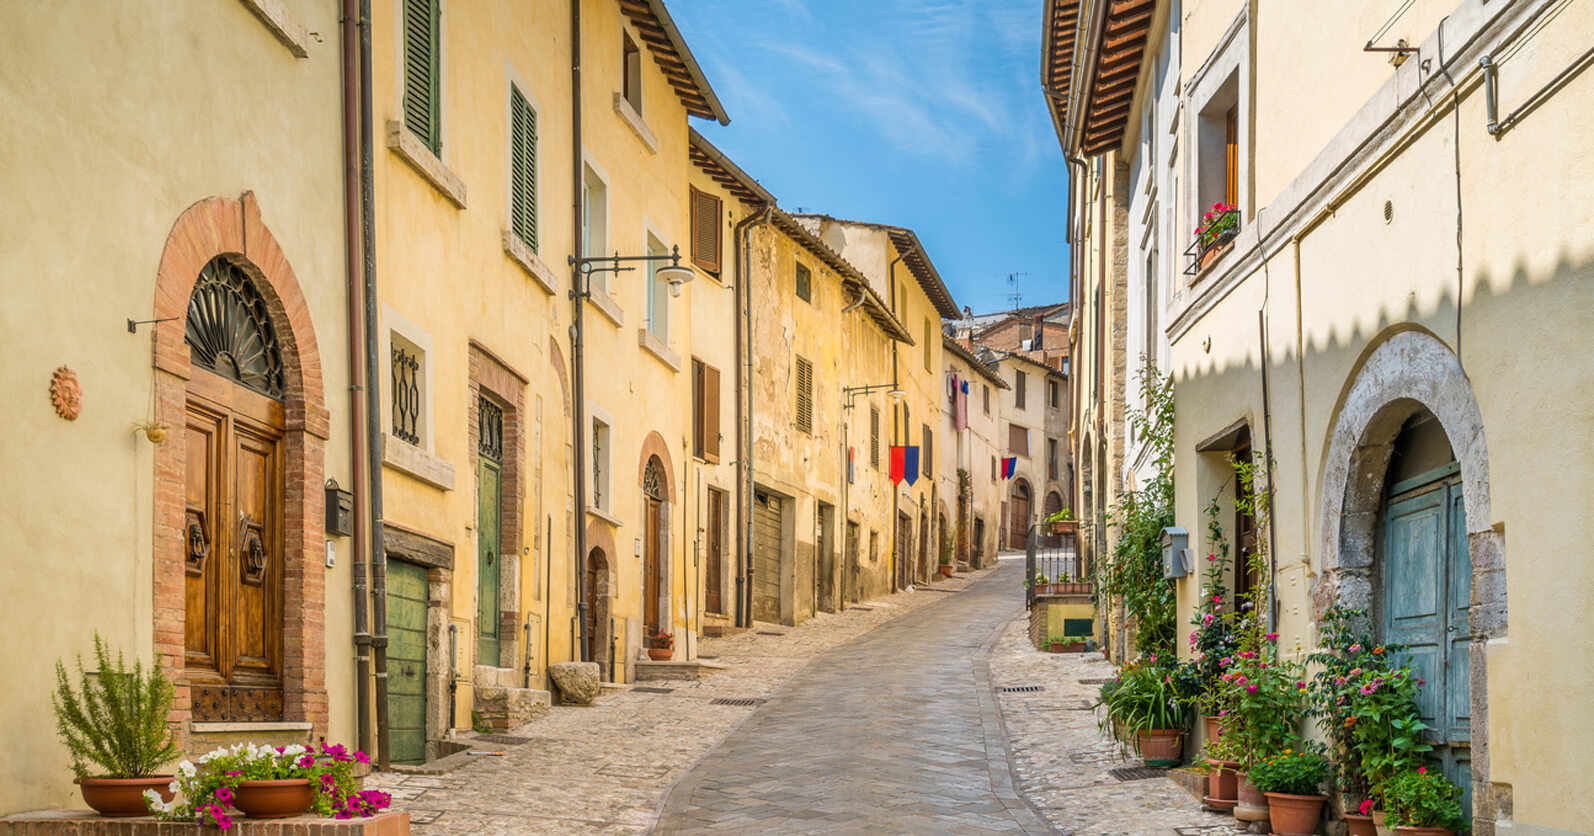 Finding accommodation in Italy